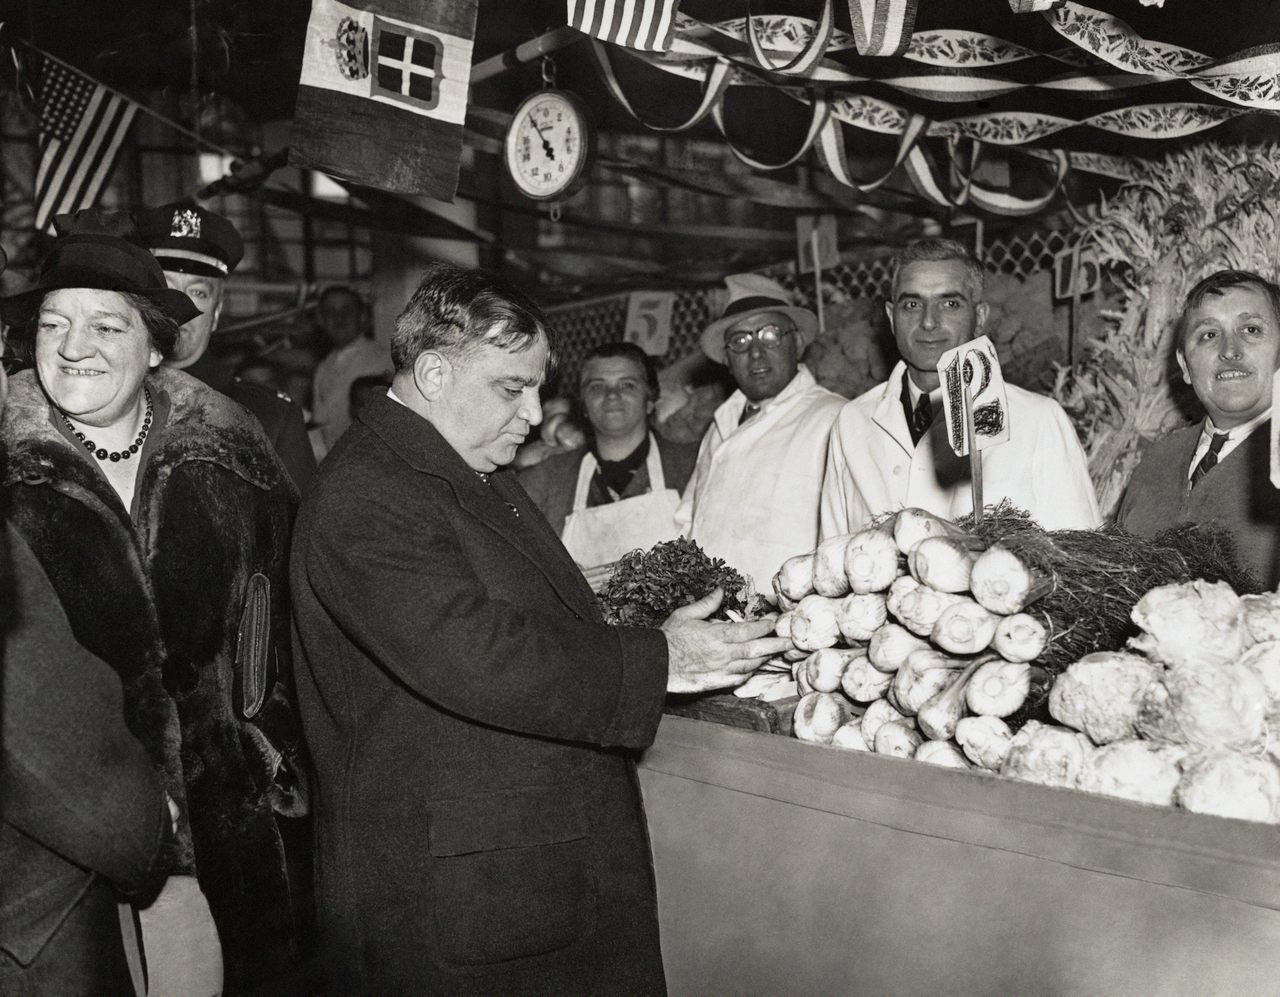 Mayor Fiorello LaGuardia examines produce at a stall several years after his artichoke war.